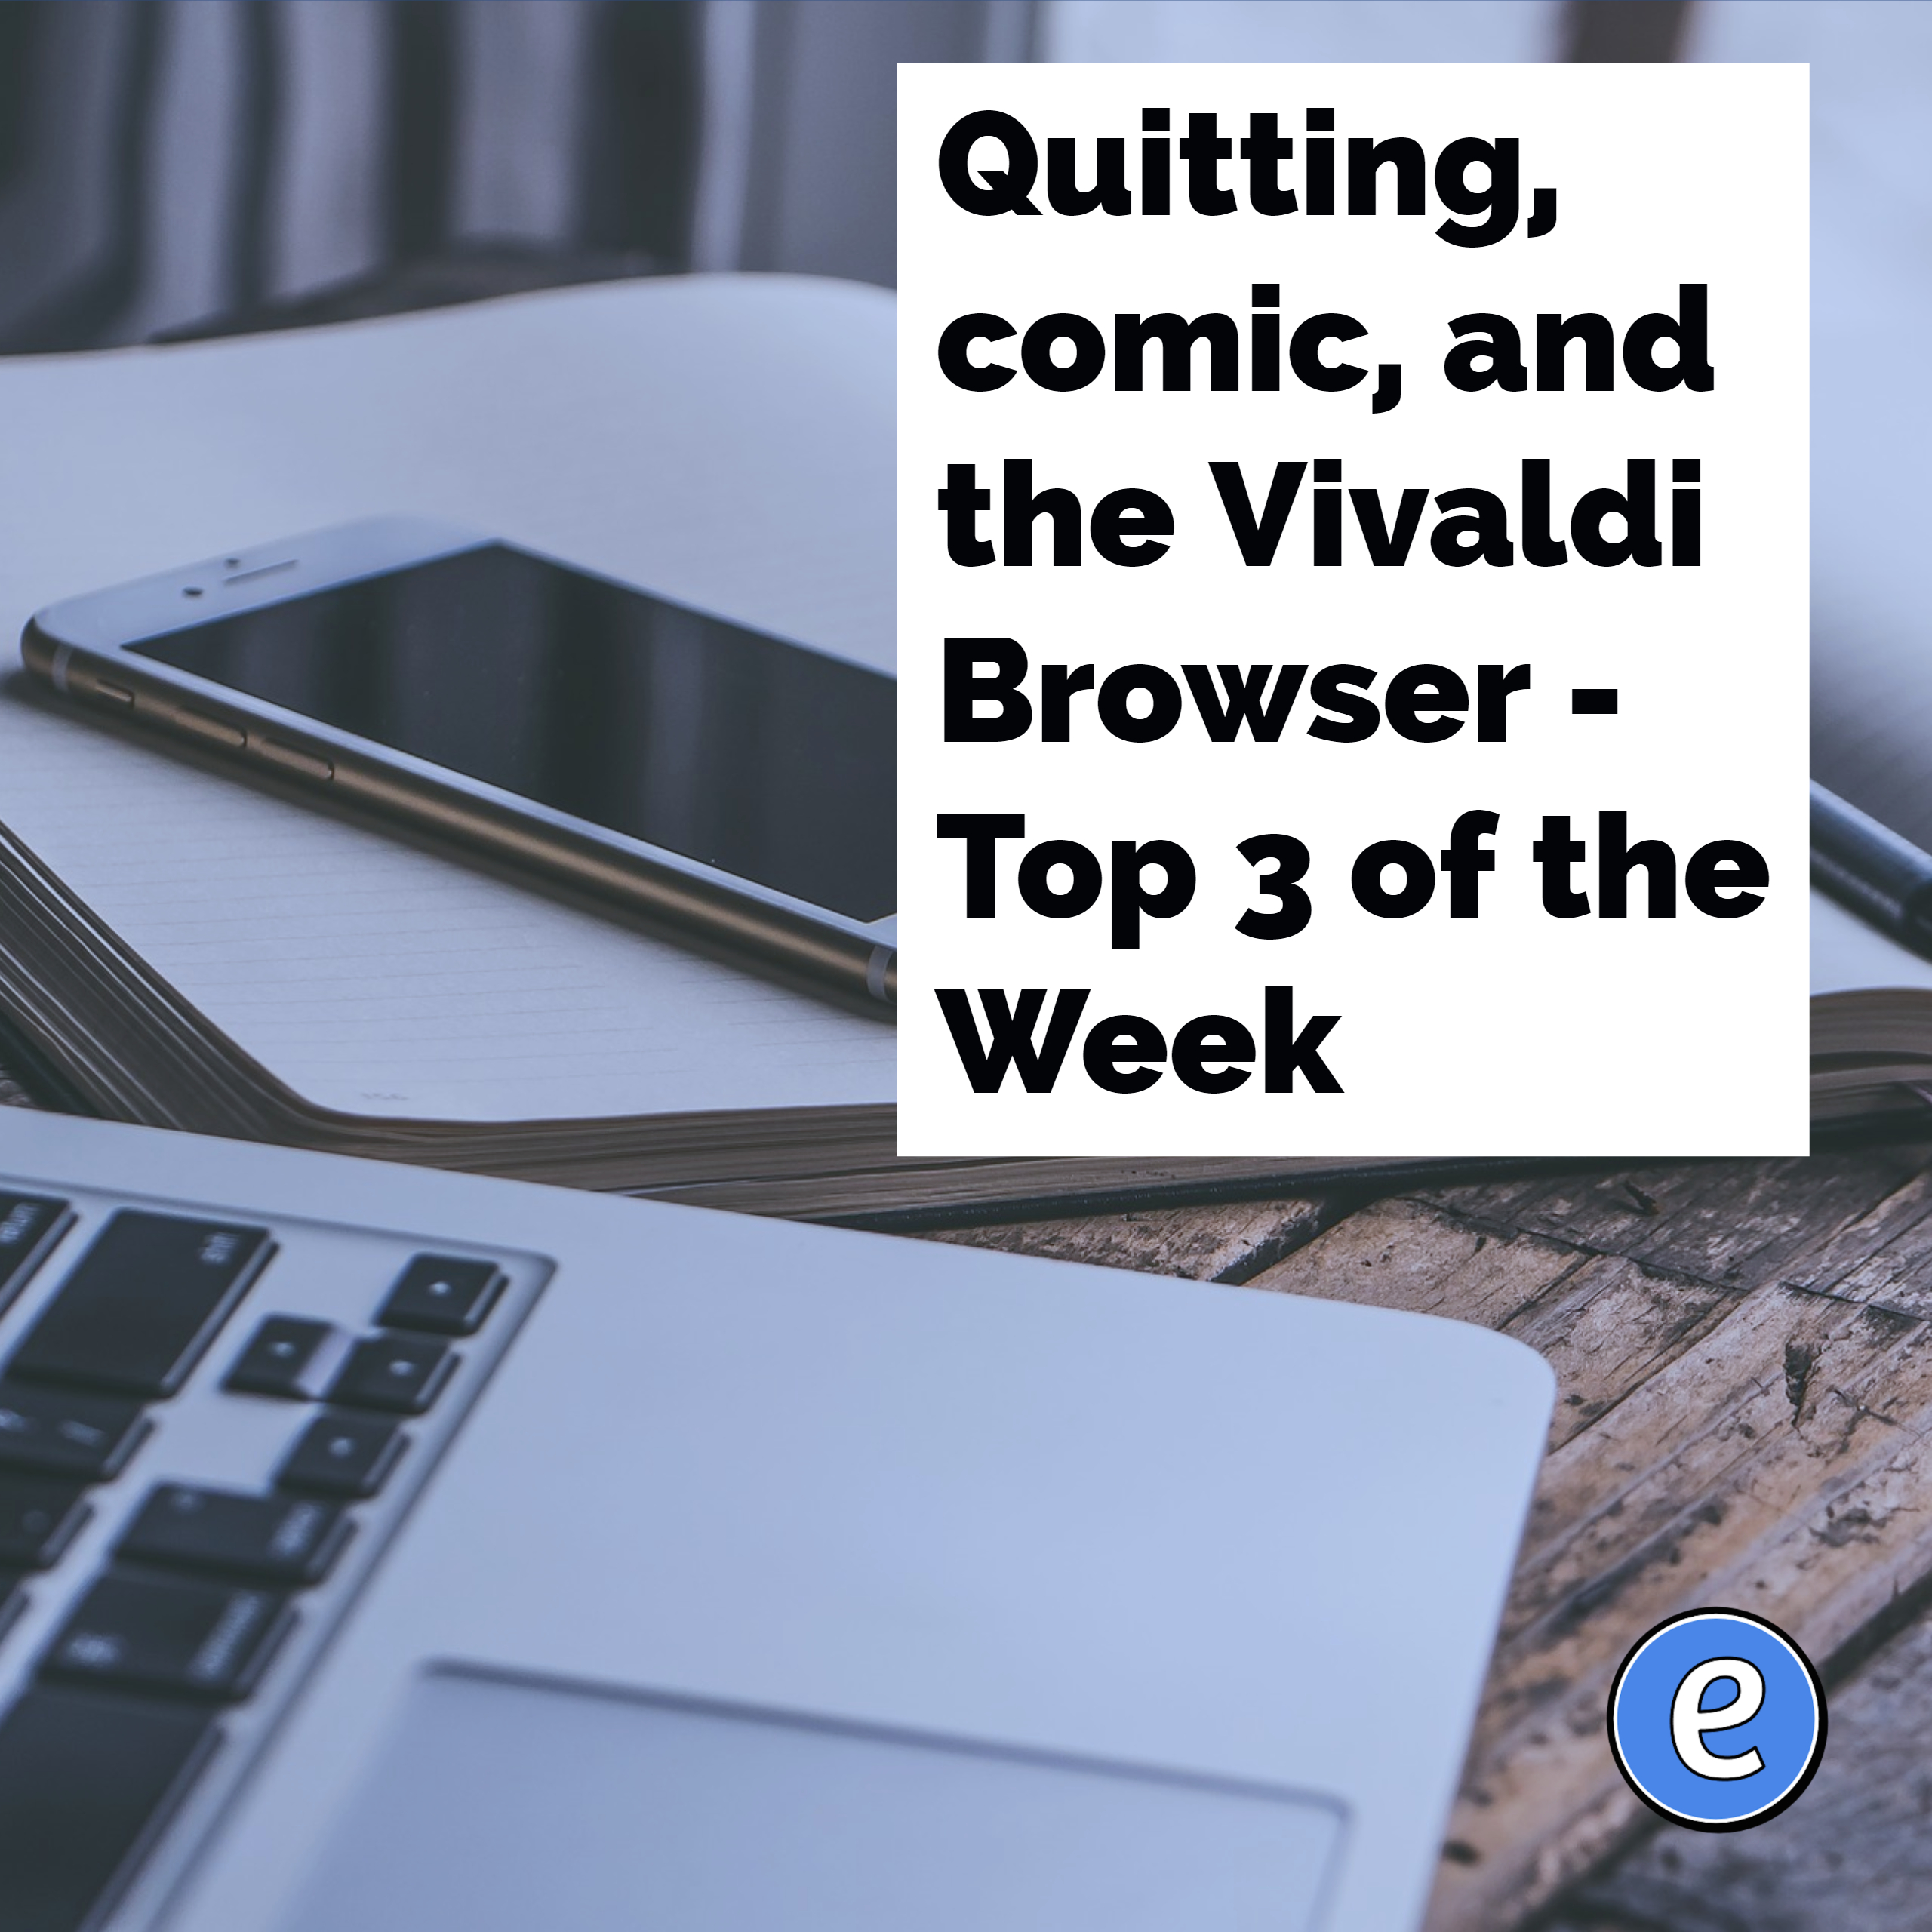 Quitting, comic, and the Vivaldi Browser – Top 3 of the Week